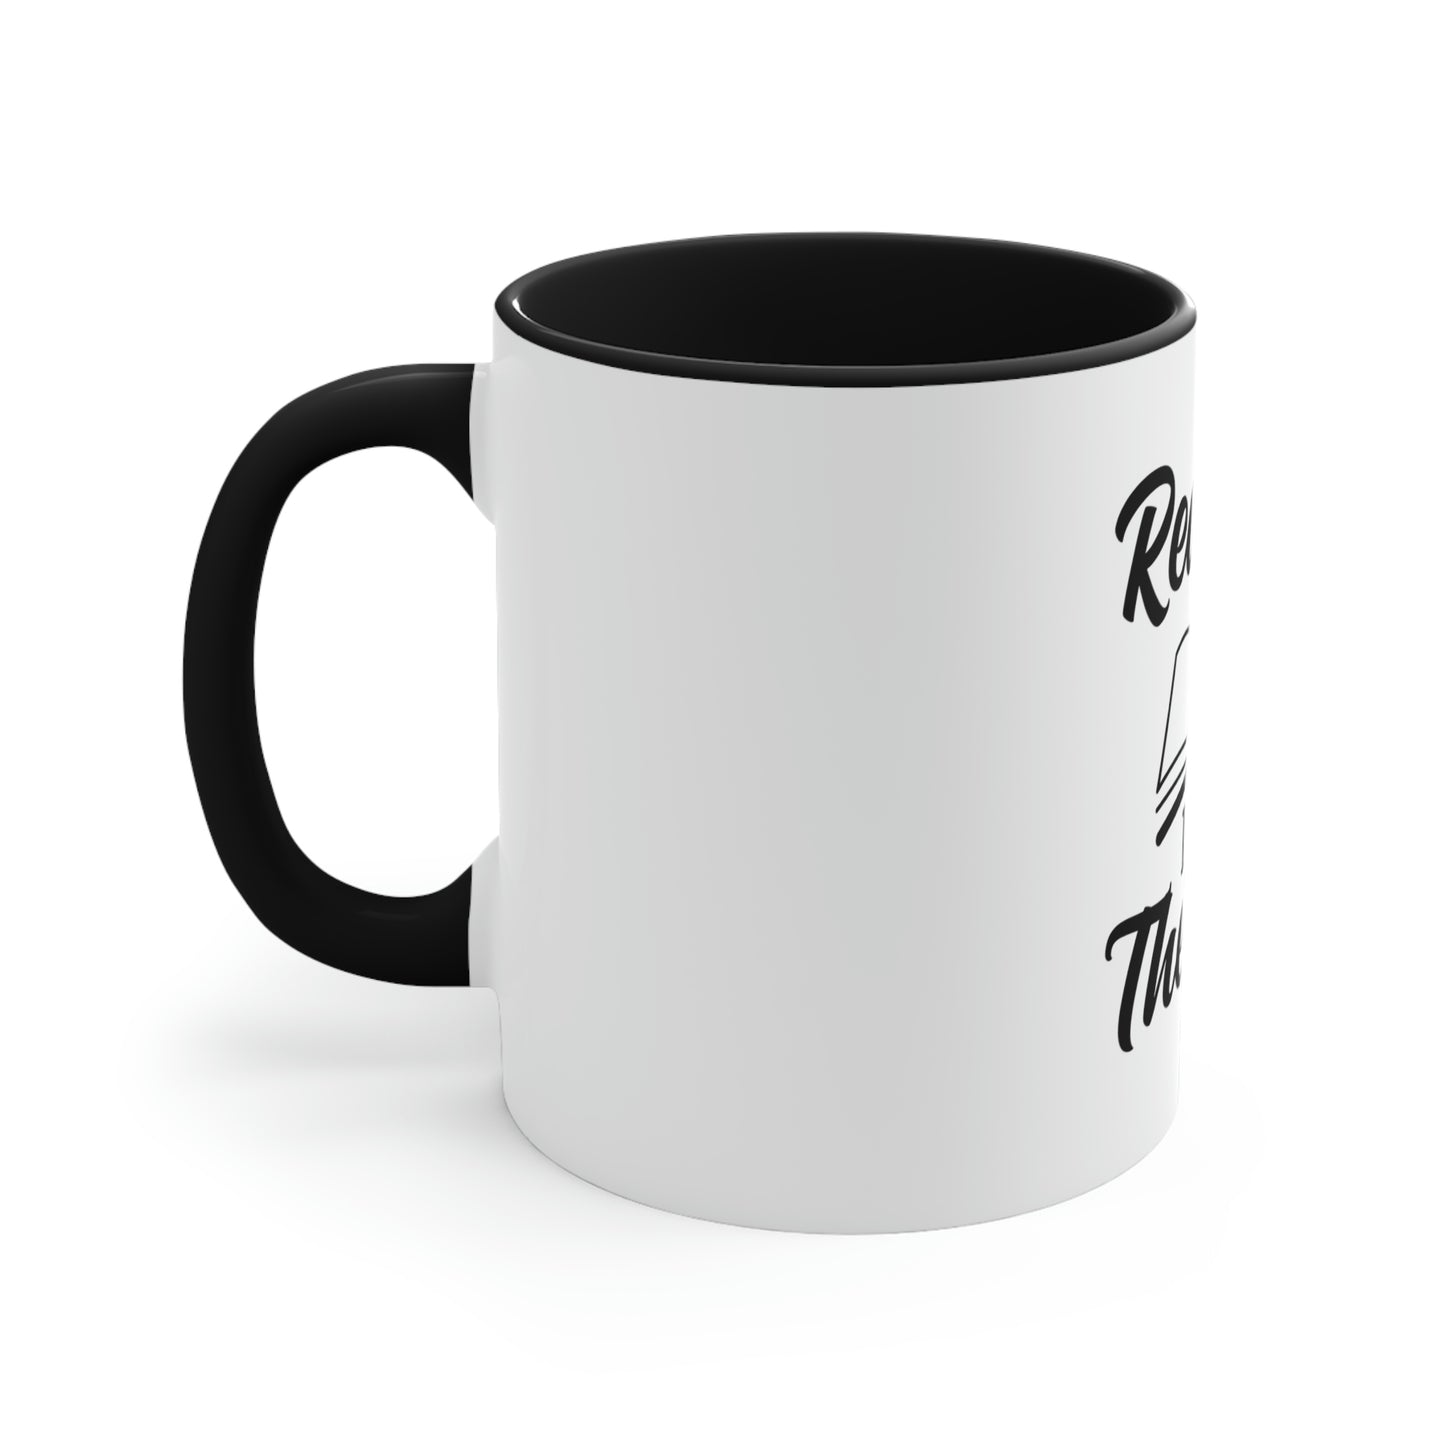 "Reading Is My Therapy" Accent Coffee Mug, 11oz